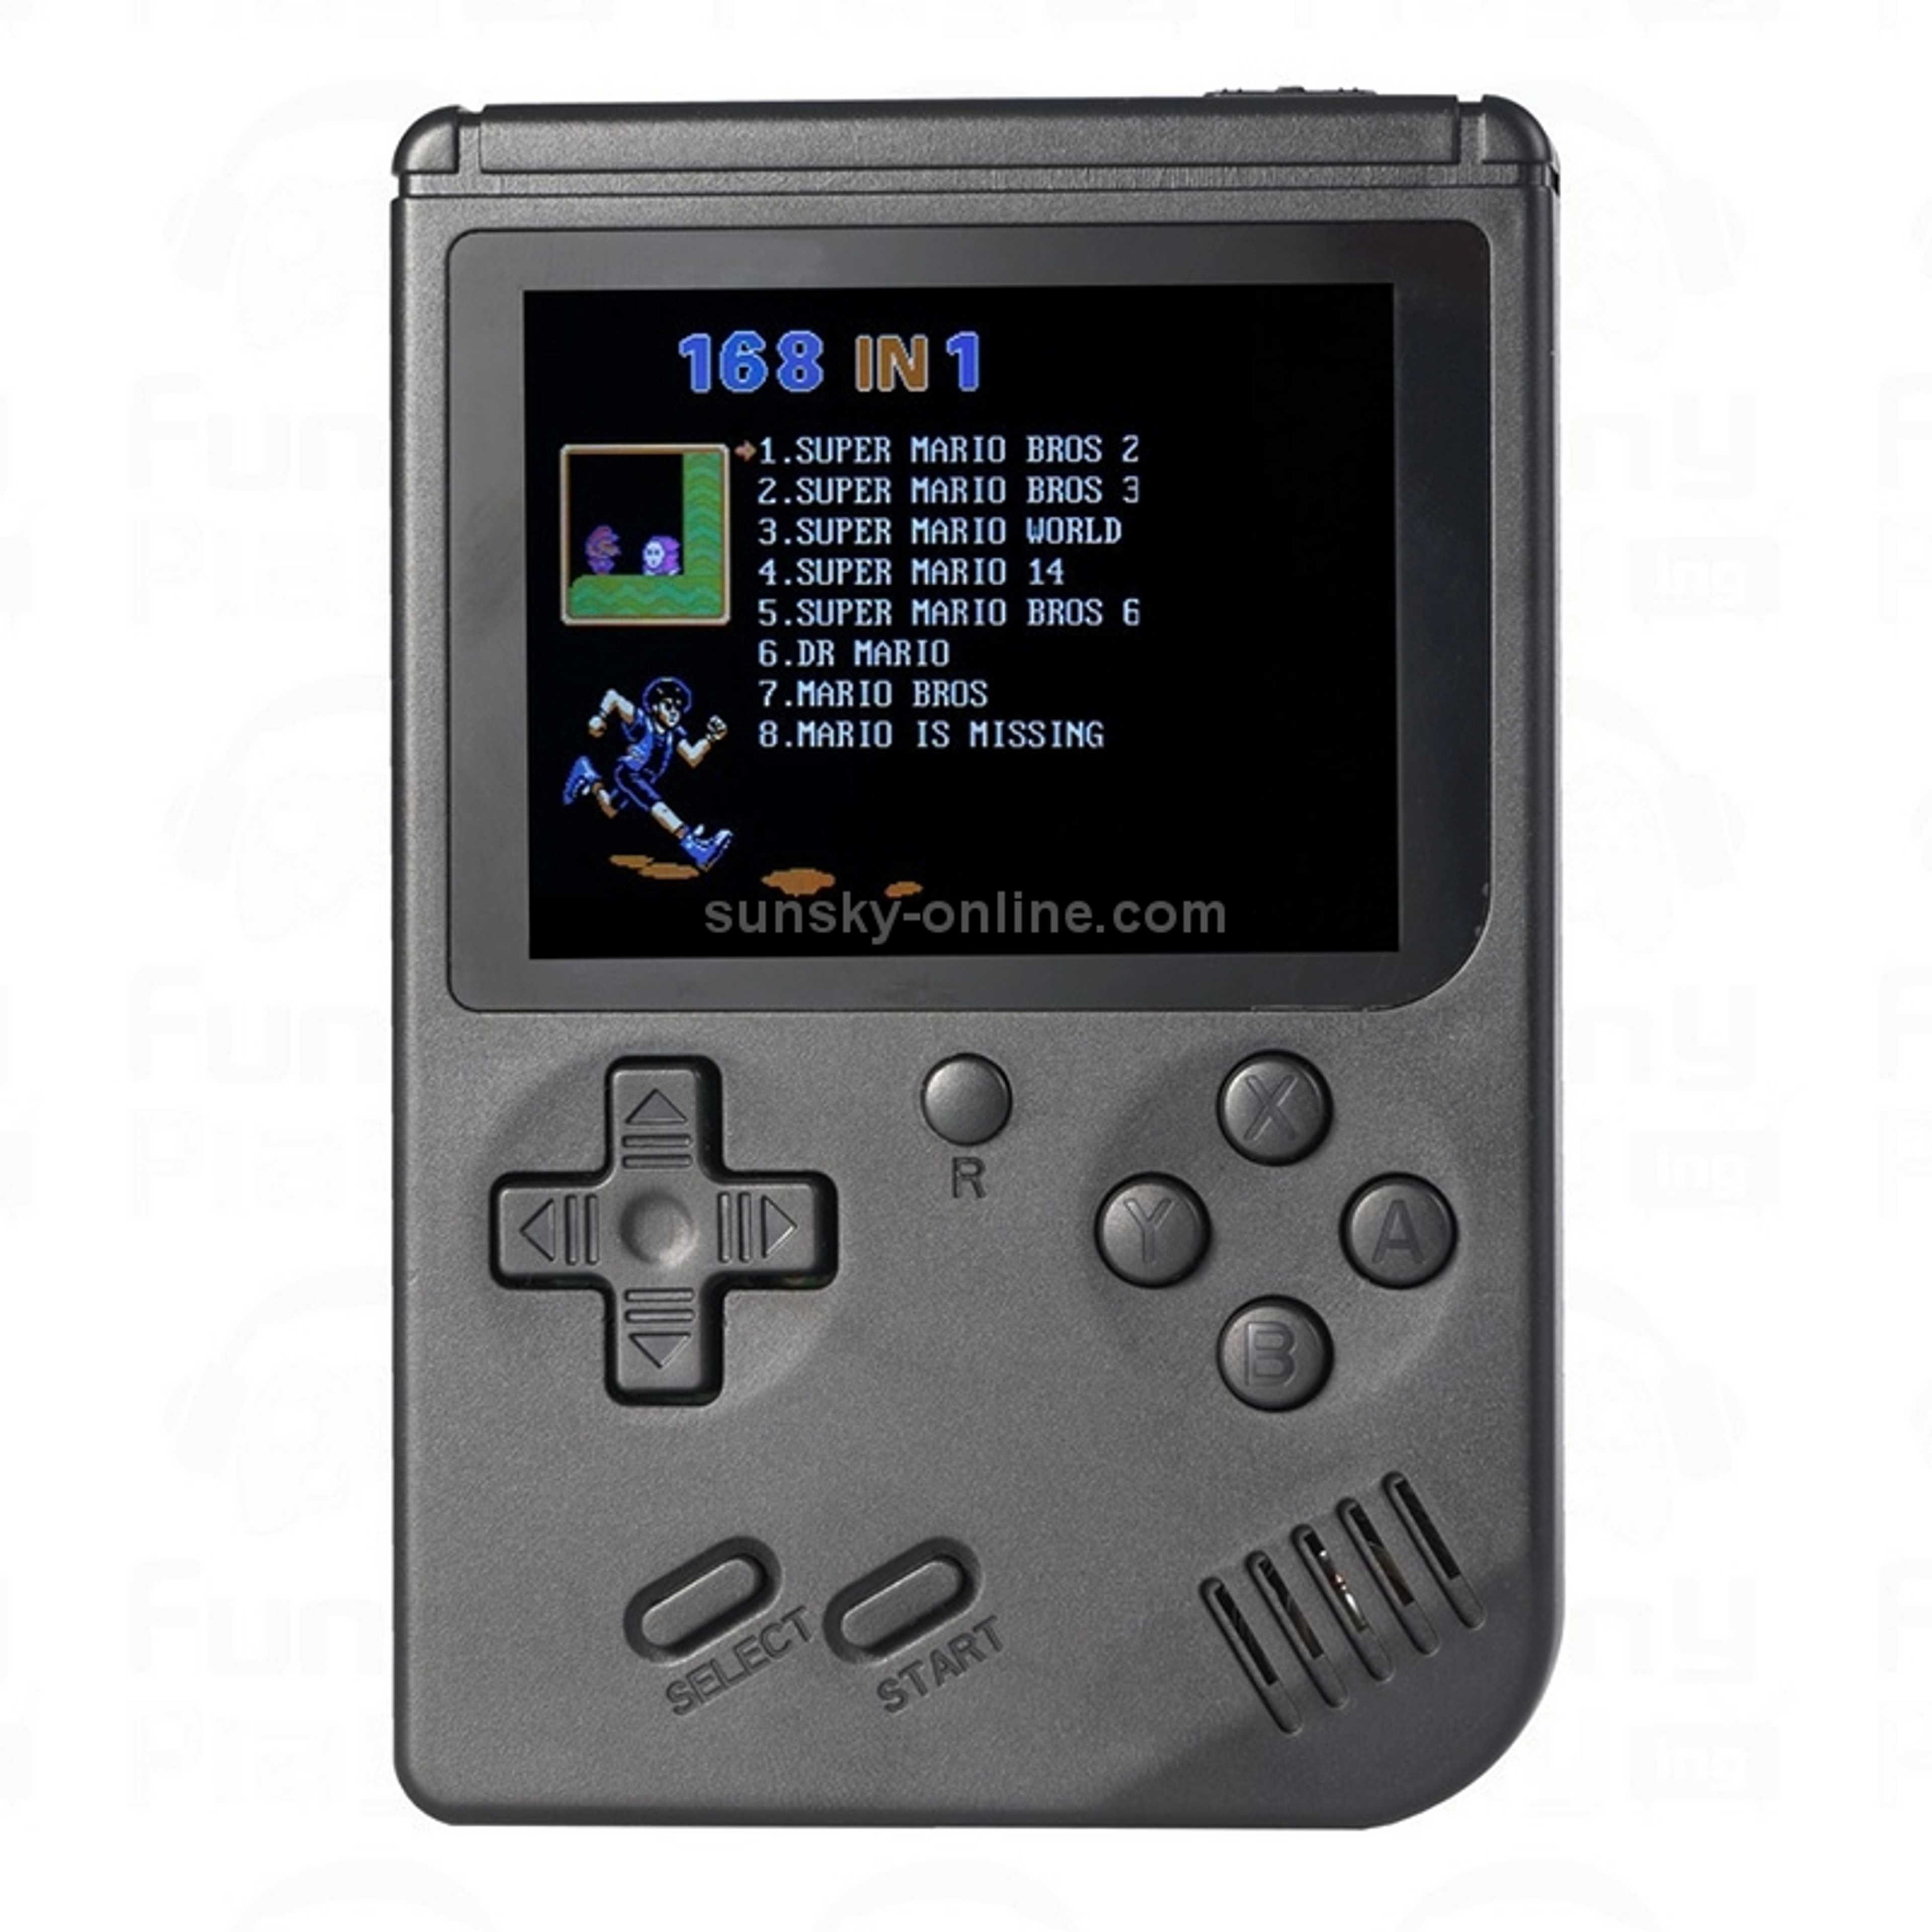 Retro FC 168 In 1 Video Handheld Gaming Console With 3.0 Inch IPS Screen